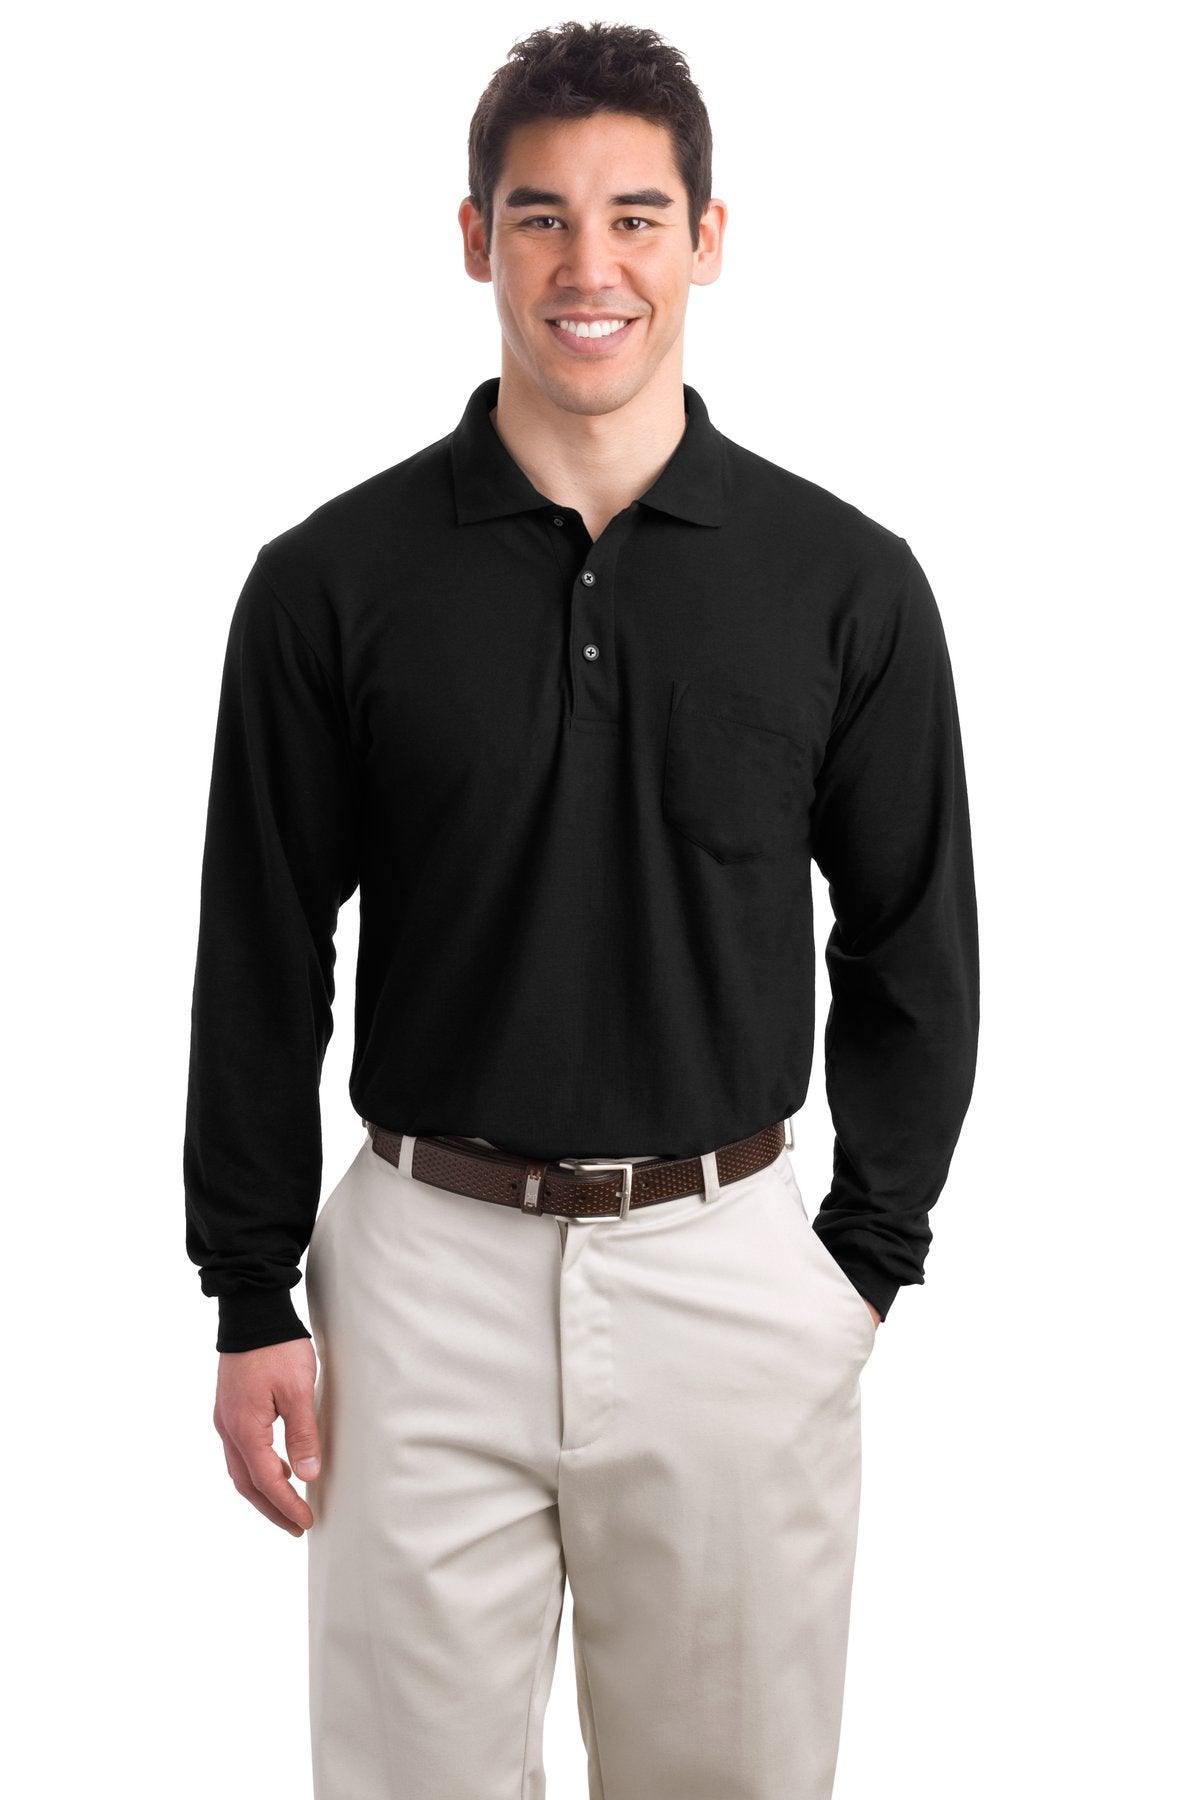 Port Authority Long Sleeve Silk Touch Polo with Pocket. K500LSP - Dresses Max